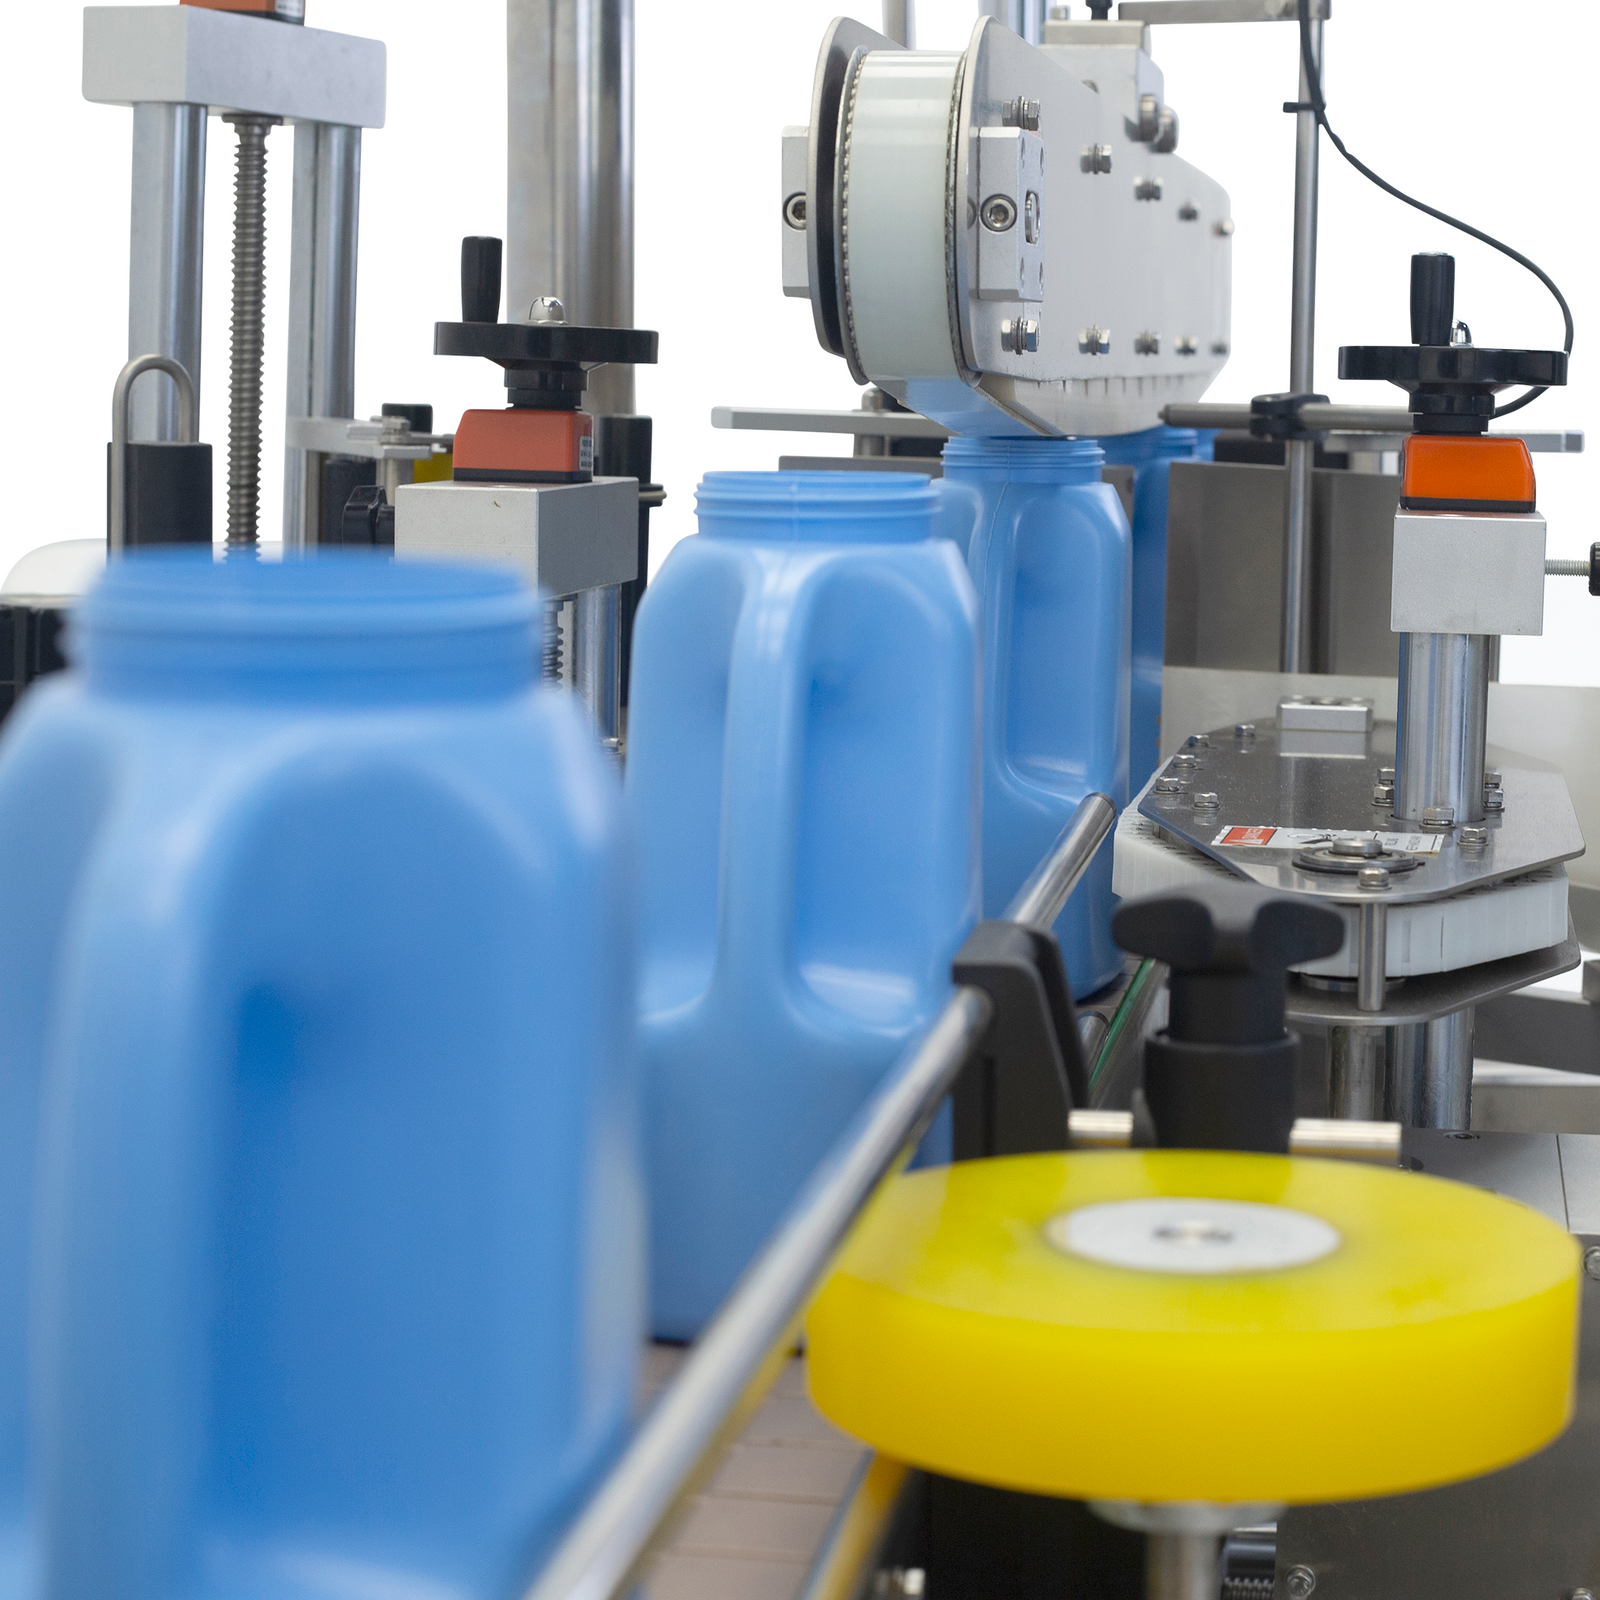 closeup showing the JORES TECHNOLOGIES® automatic-label applicator under production with 5 blue oval plastic containers on the conveyor integrated to the machine